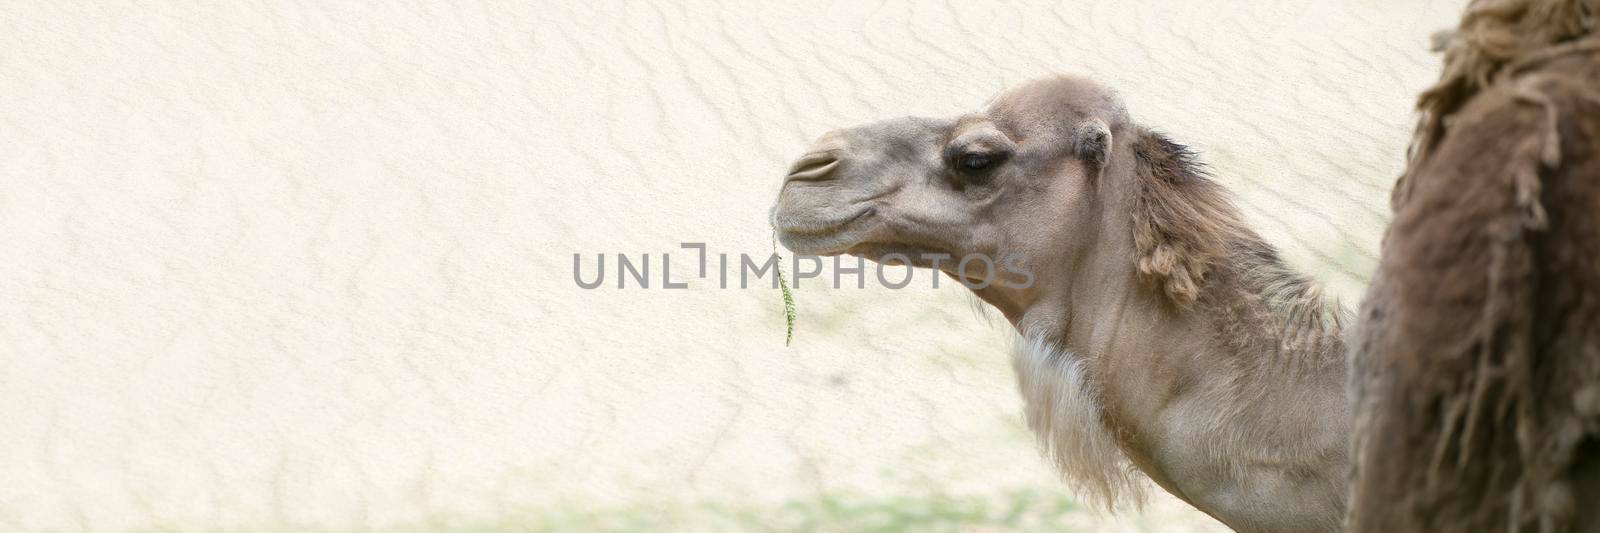 Camel in the desert, close-up. Camel's head close-up on the background of sand in the desert